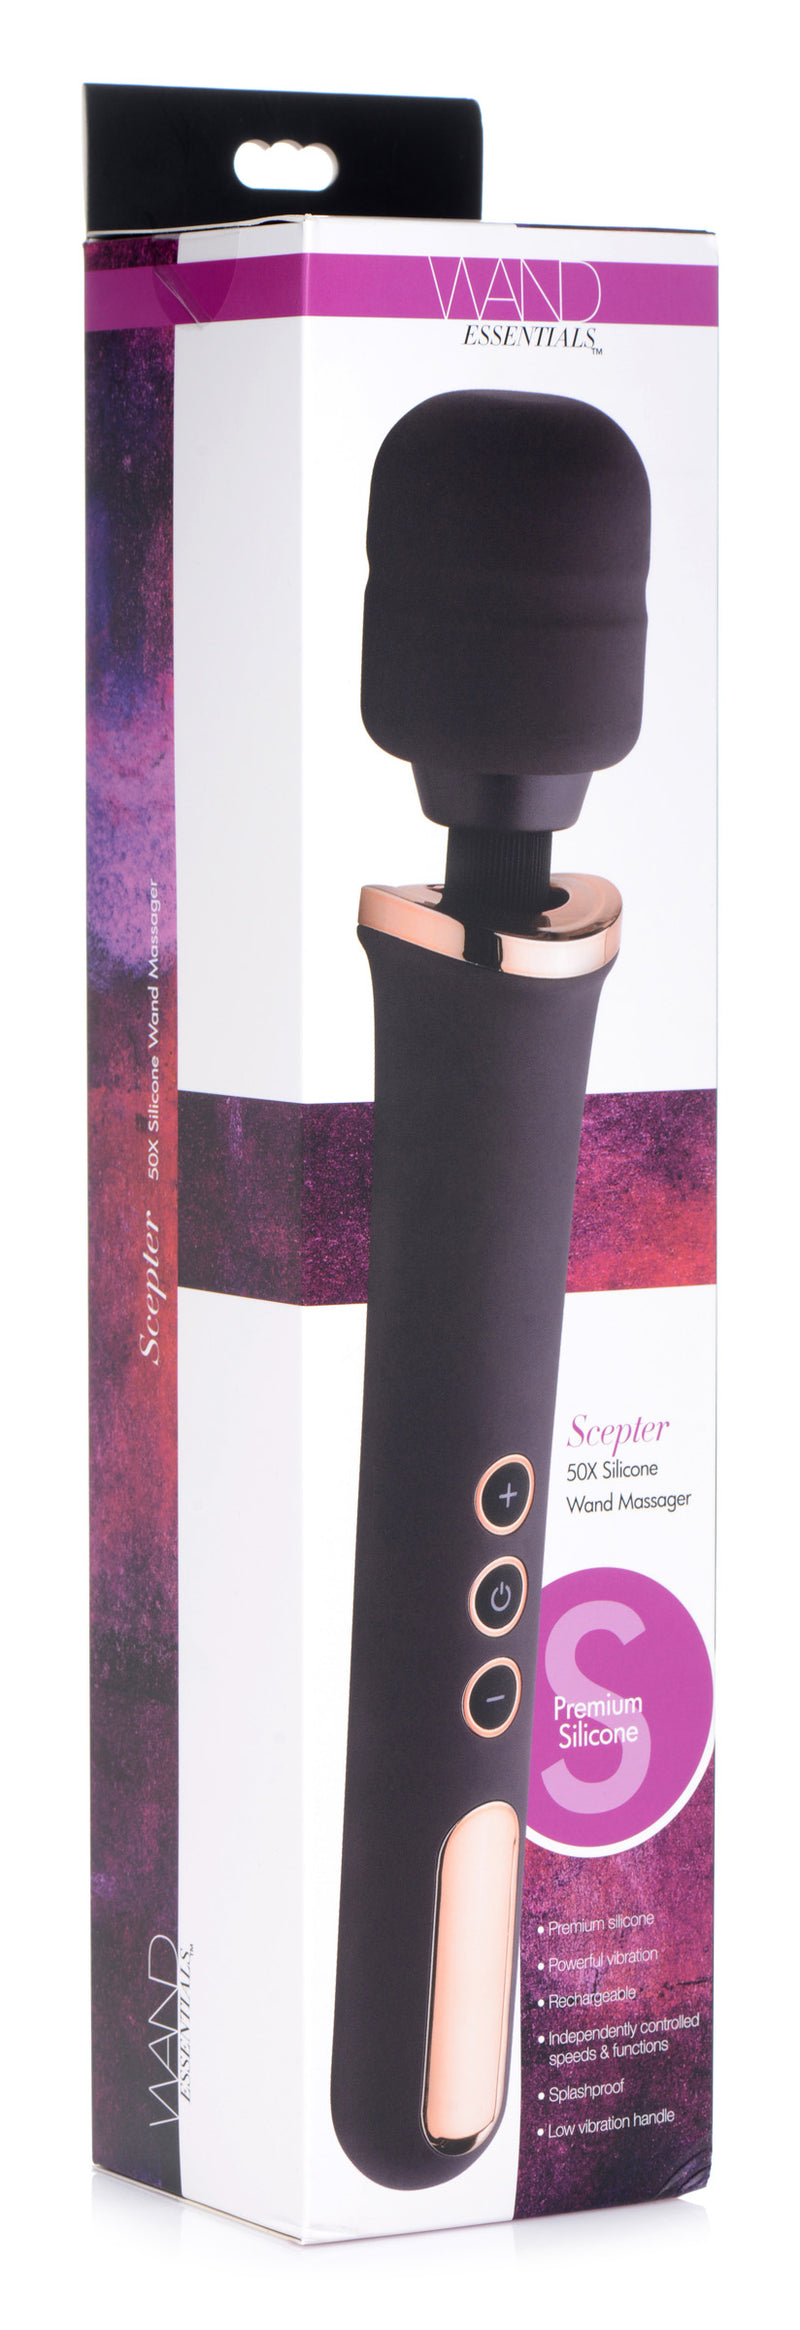 Scepter 50X Silicone Wand Massager wand-massagers from Wand Essentials